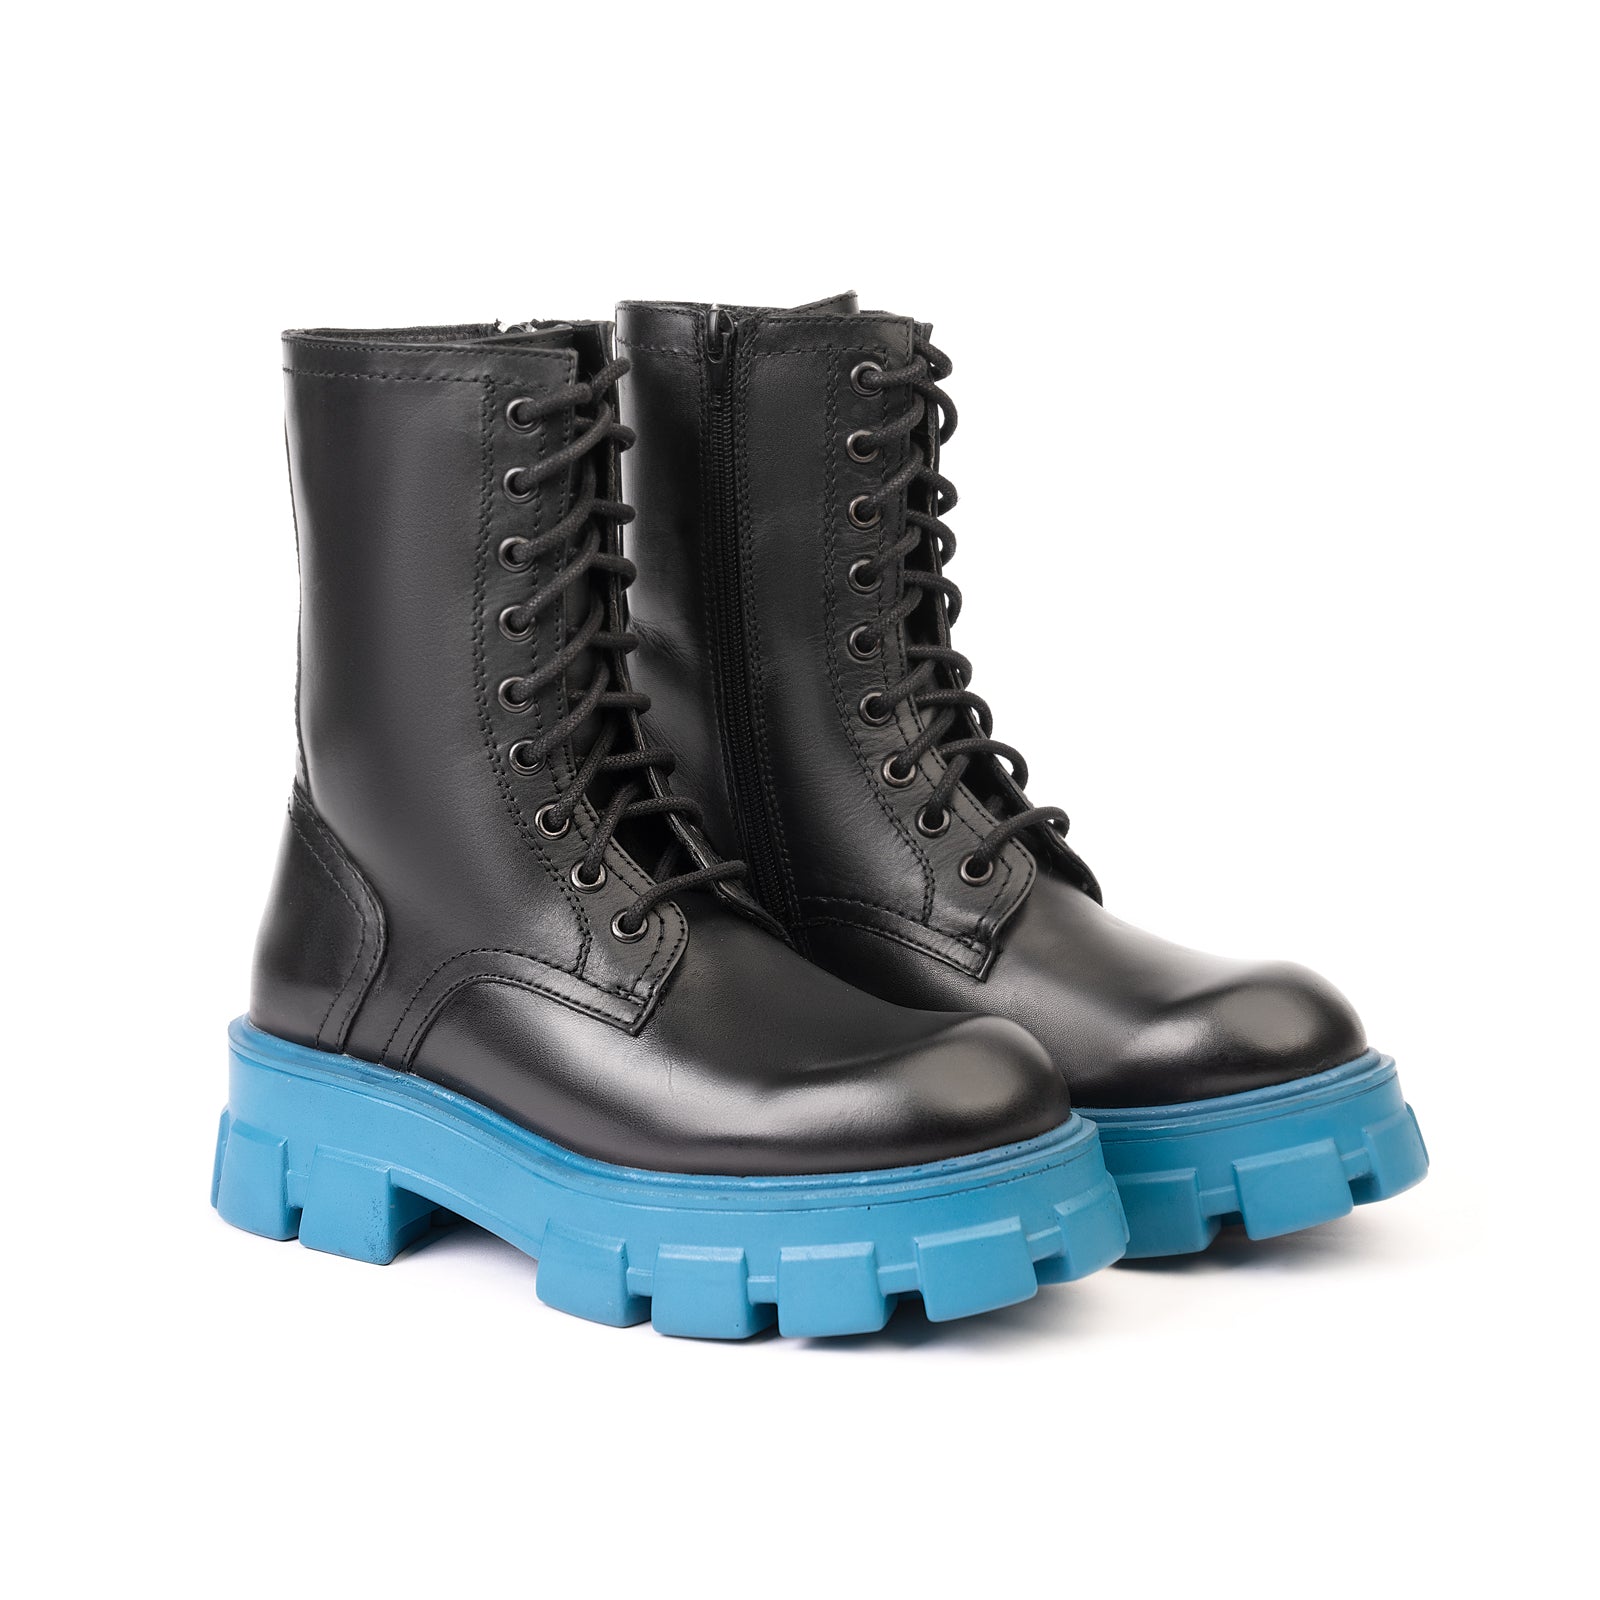 Teresia Combat Boots with Blue Sole